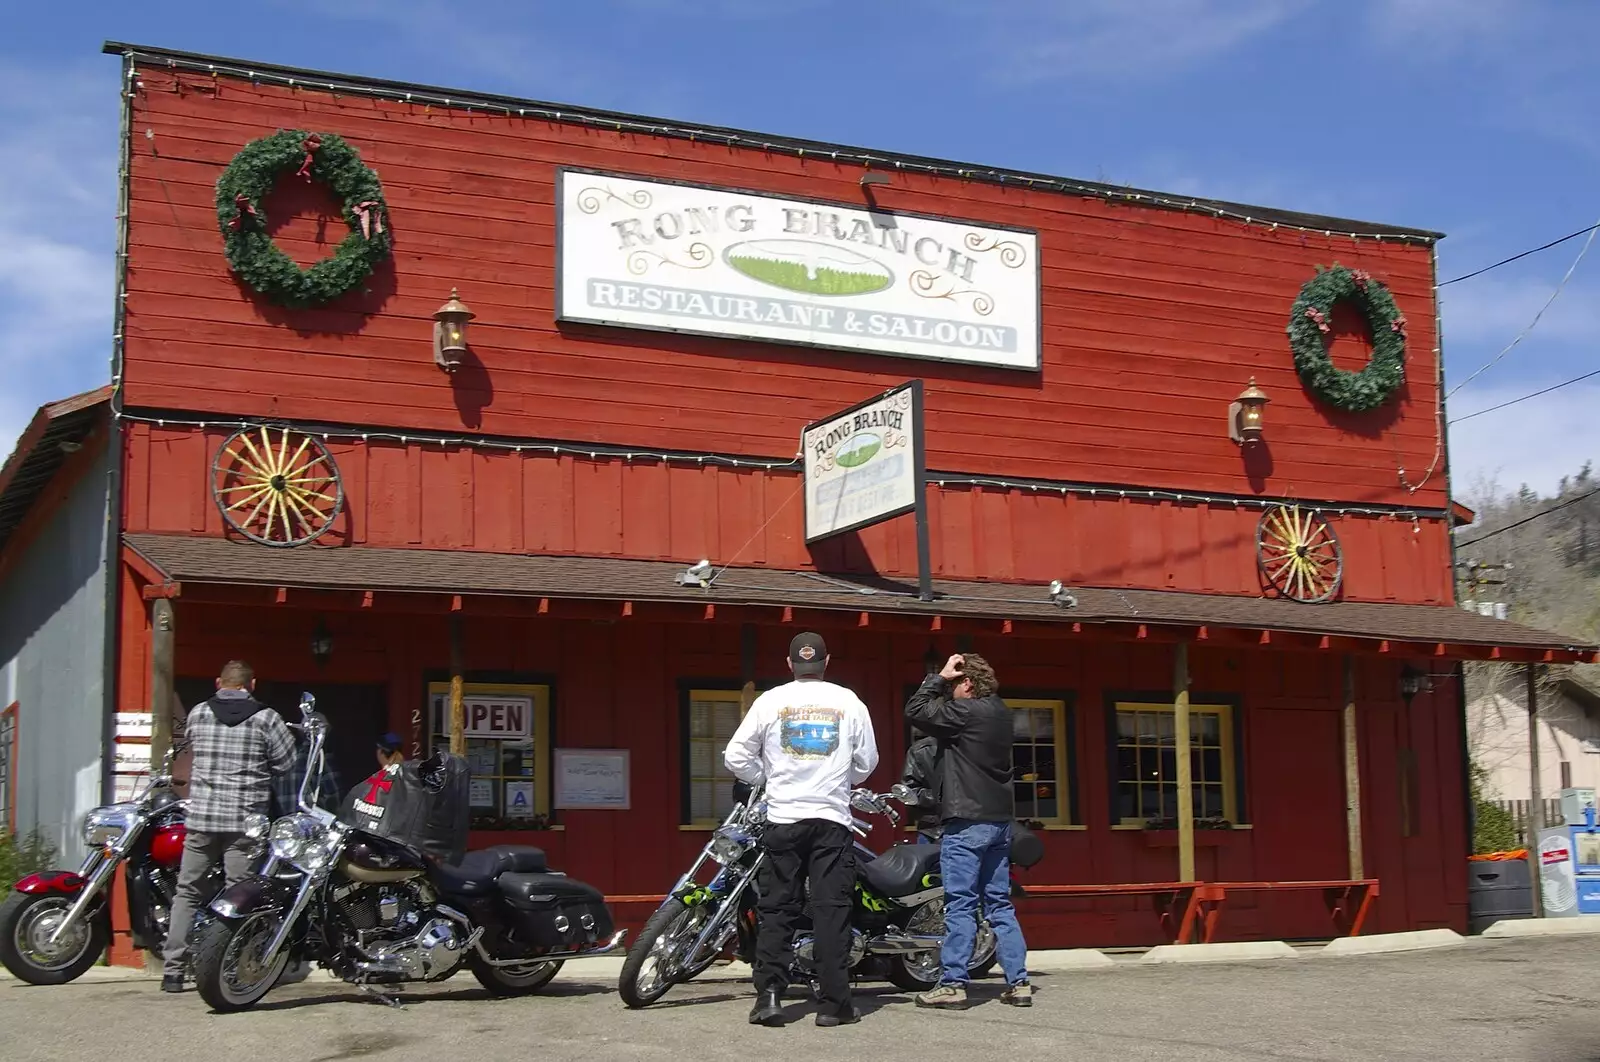 The 'Rong Branch' saloon, and a bunch of bikers, from San Diego 8: The Beaches of Torrey Pines, and Ramona, California, USA - 29th February 2008